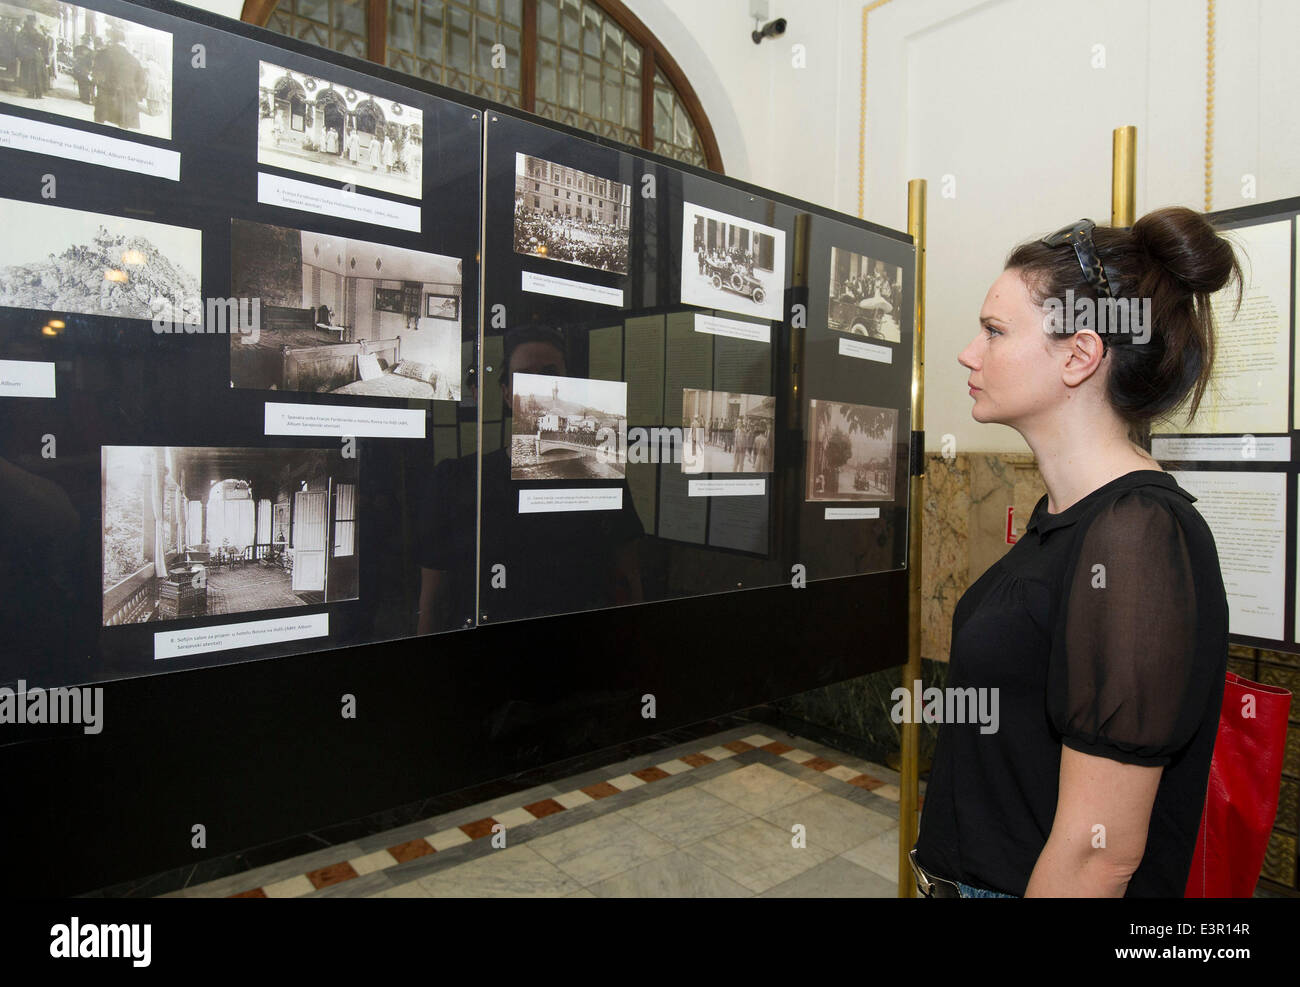 Zagreb, Croatia. 27th June, 2014. A visitor looks at the photos exhibited during the official commemoration of the 100th anniversary of the start of World War I (WWI) at the Croatian State Archives in Zagreb, Croatia, June 27, 2014. The central ceremony of marking the start of the WWI was held here on Friday. © Miso Lisanin/Xinhua/Alamy Live News Stock Photo